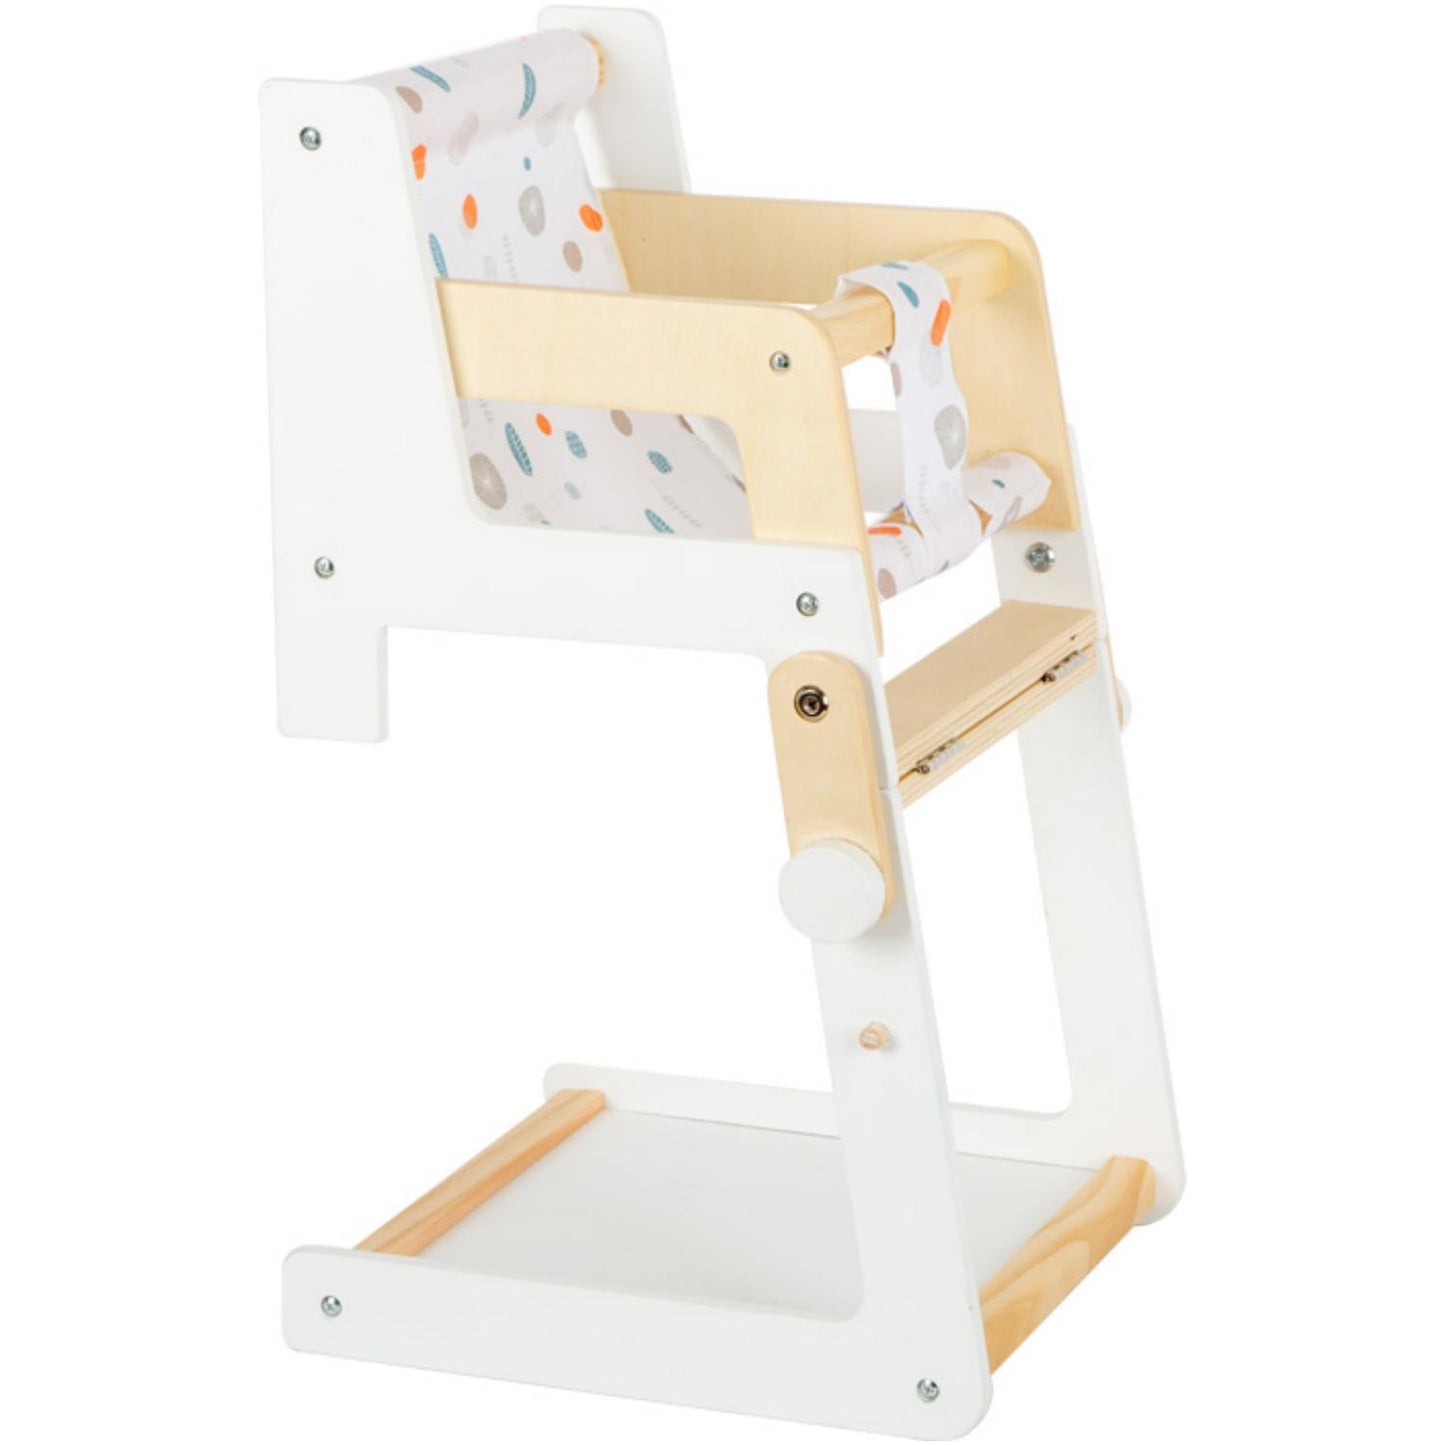 Doll 2-in-1 High Chair | Wooden Pretend Play Toy for Kids